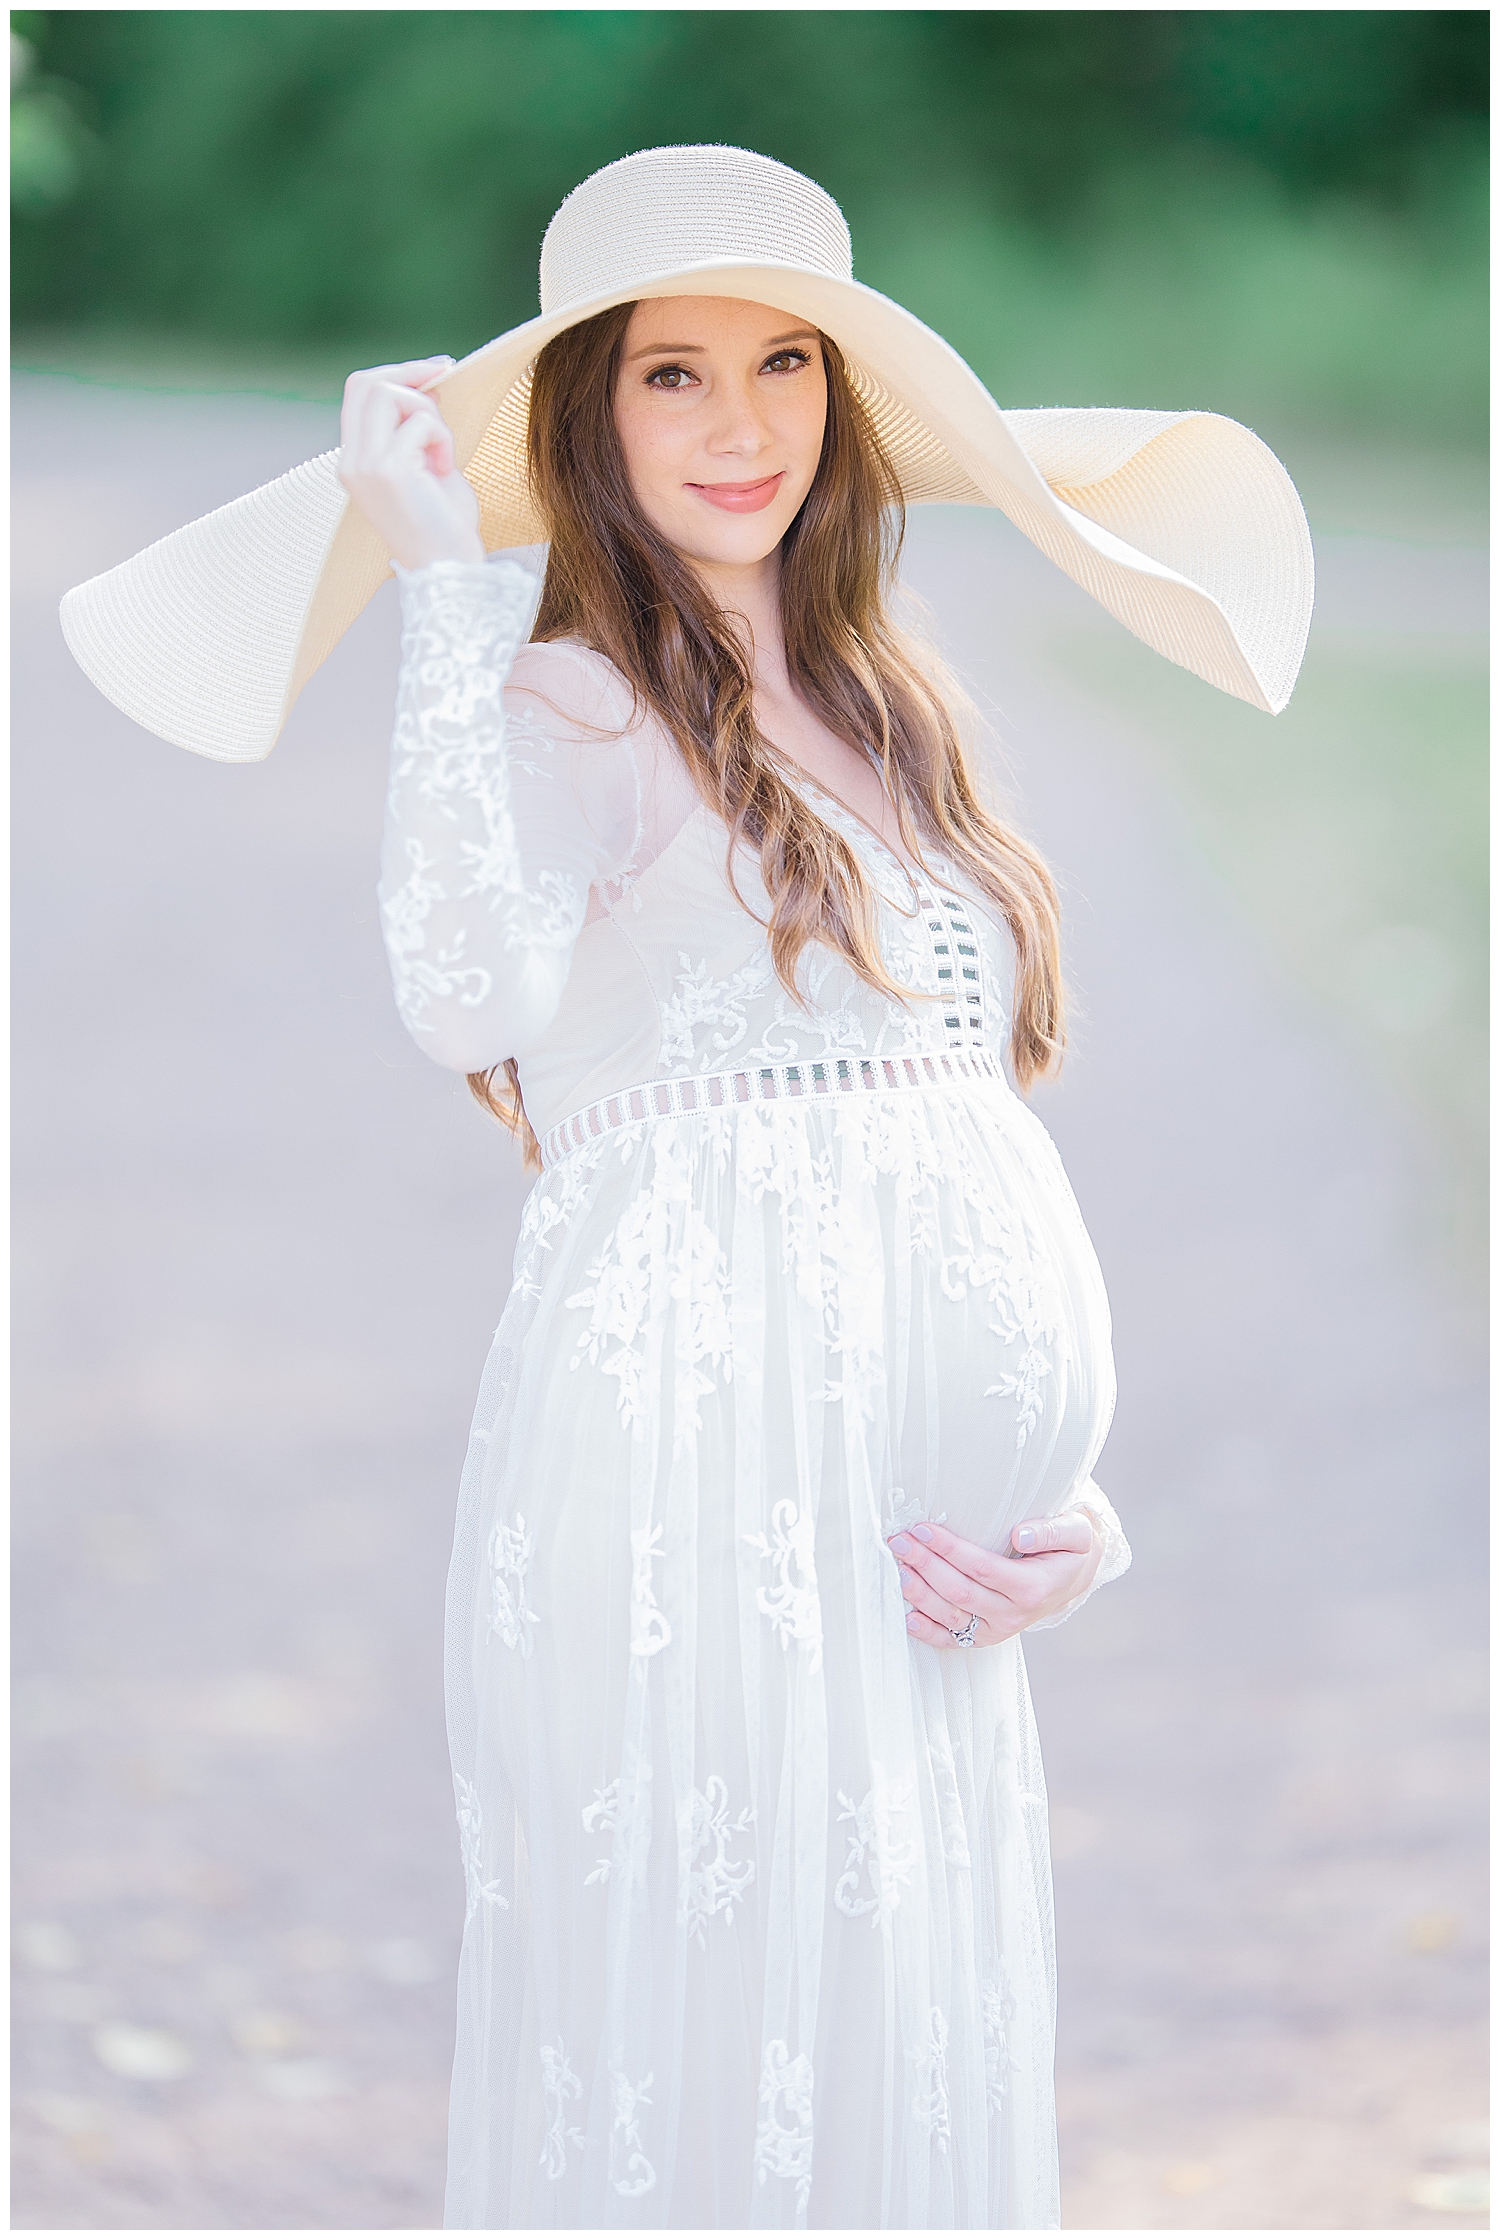 Outdoor Maternity session sertoma park